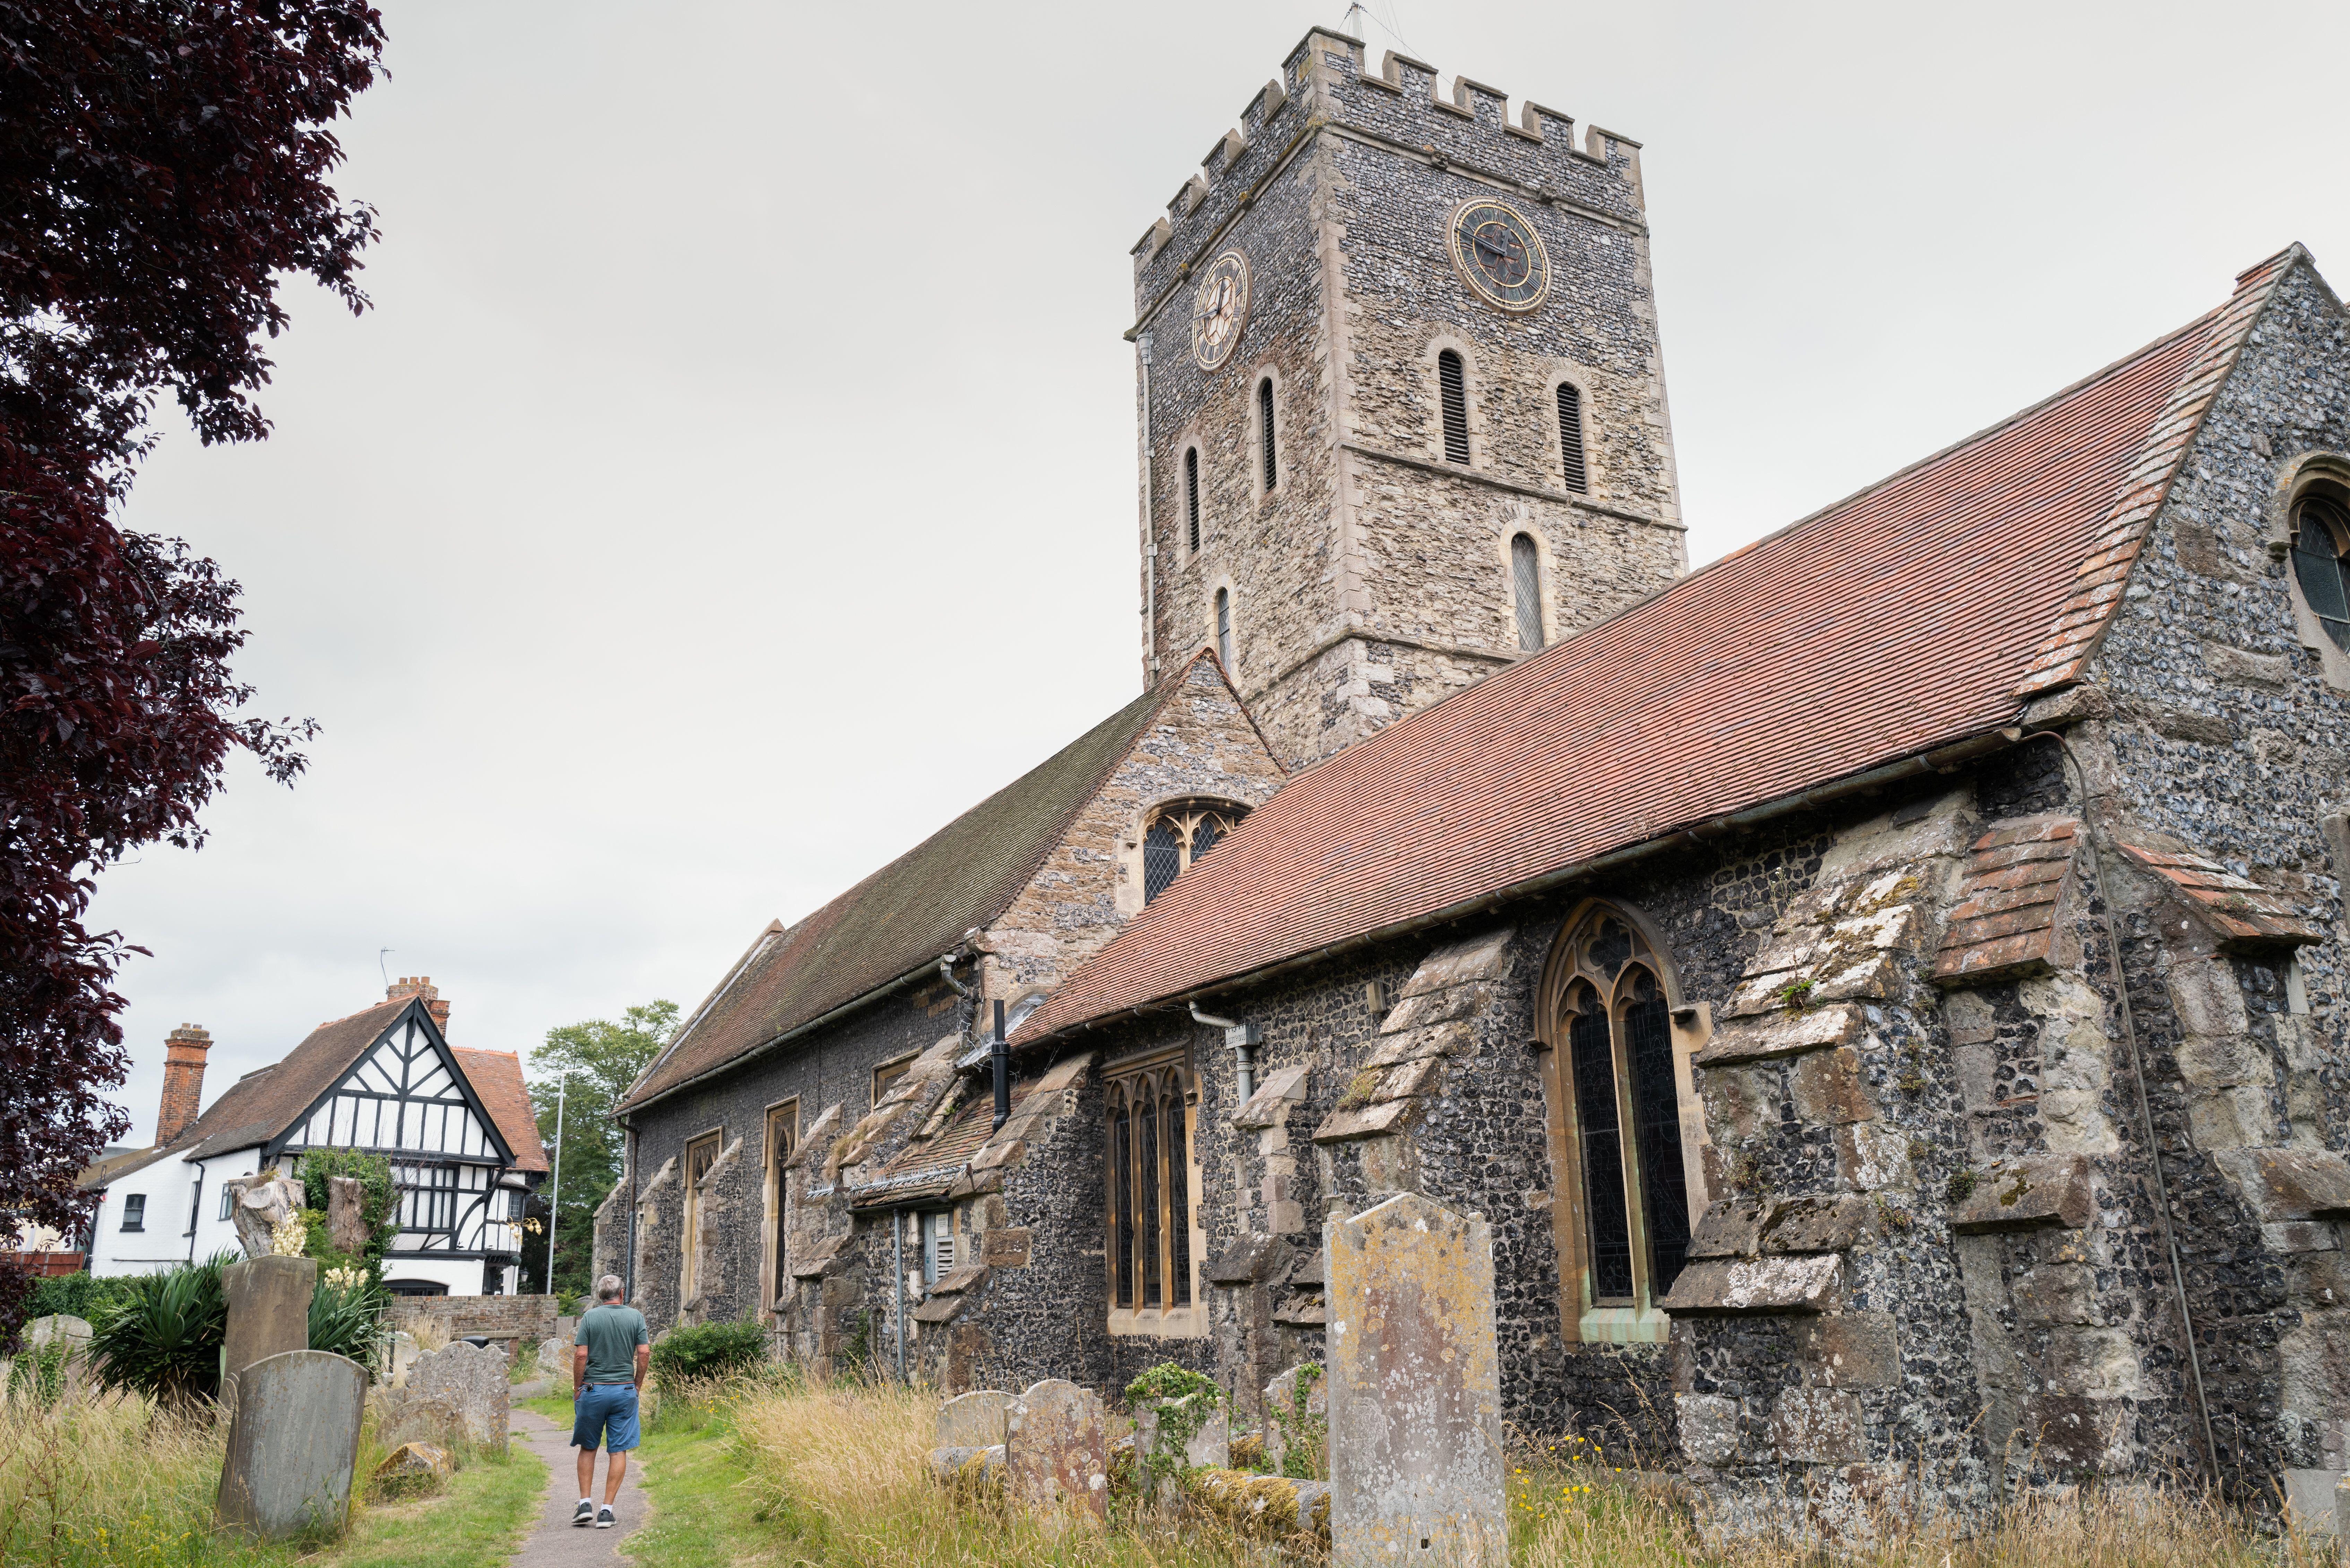 The victim was attacked as he entered the St Laurence Graveyard, the churchyard of the St Laurence-In-Thanet Church in the village of St Lawrence